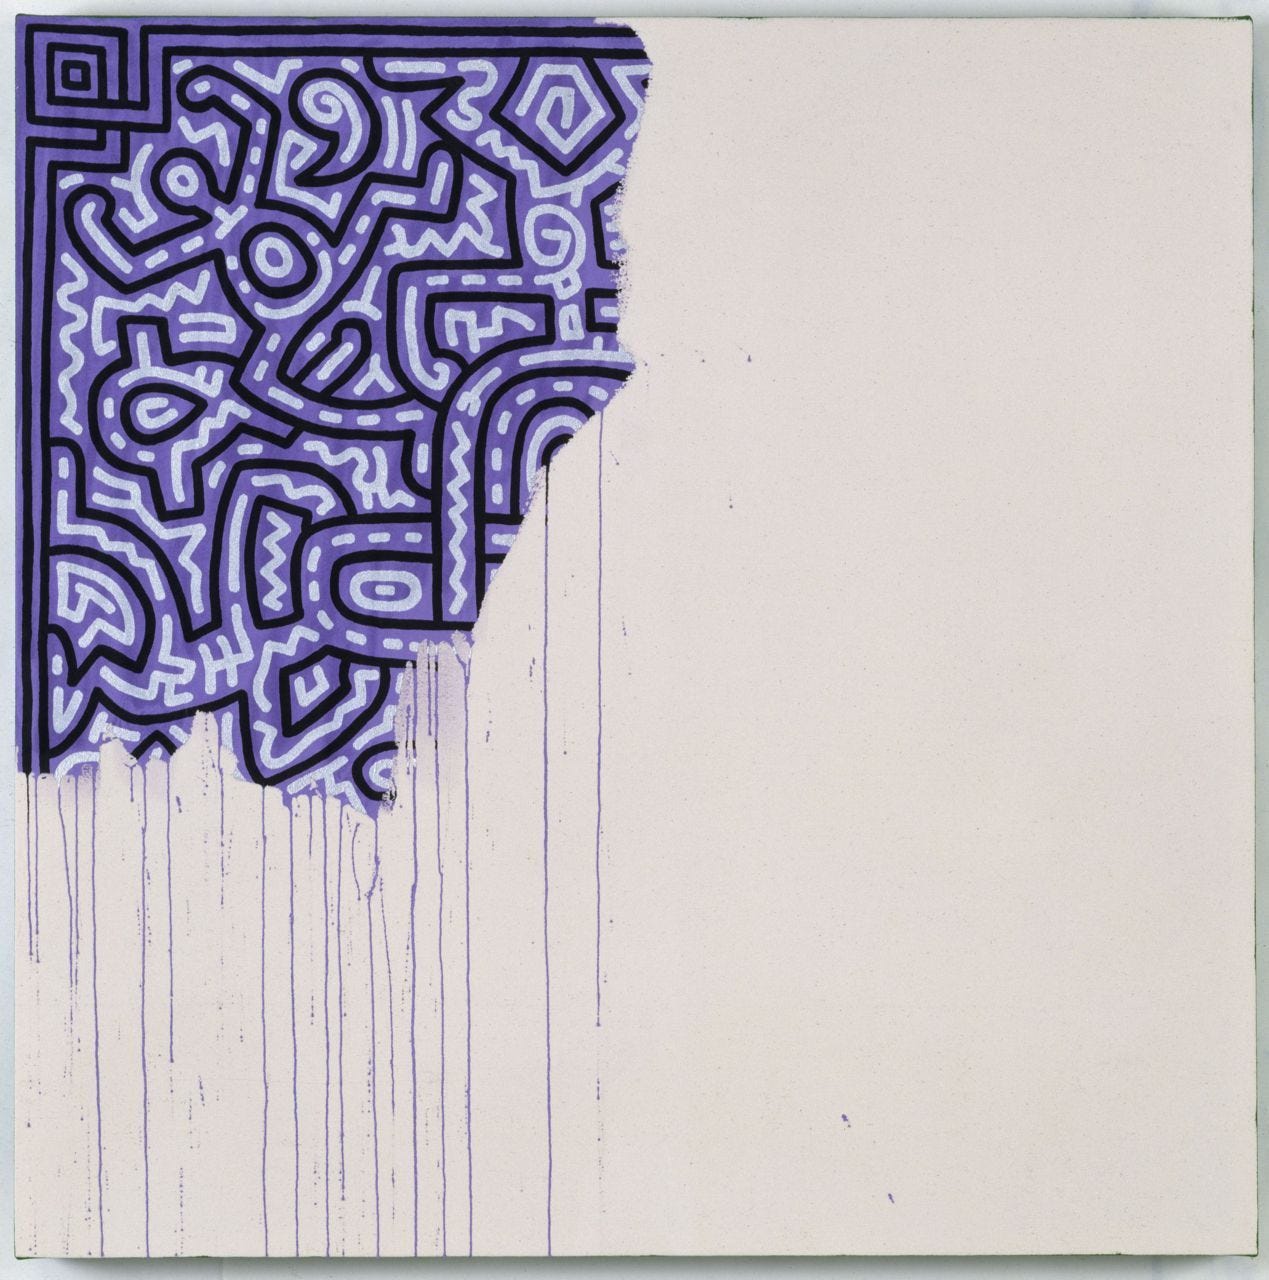 Keith Haring, “Unfinished Painting,” 1989
From Hide/Seek at the National Portrait Gallery:
“Keith Haring, famous for his playful, street-inspired patterns and figures, died from complications related to AIDS in 1990, at age 31. This painting,...